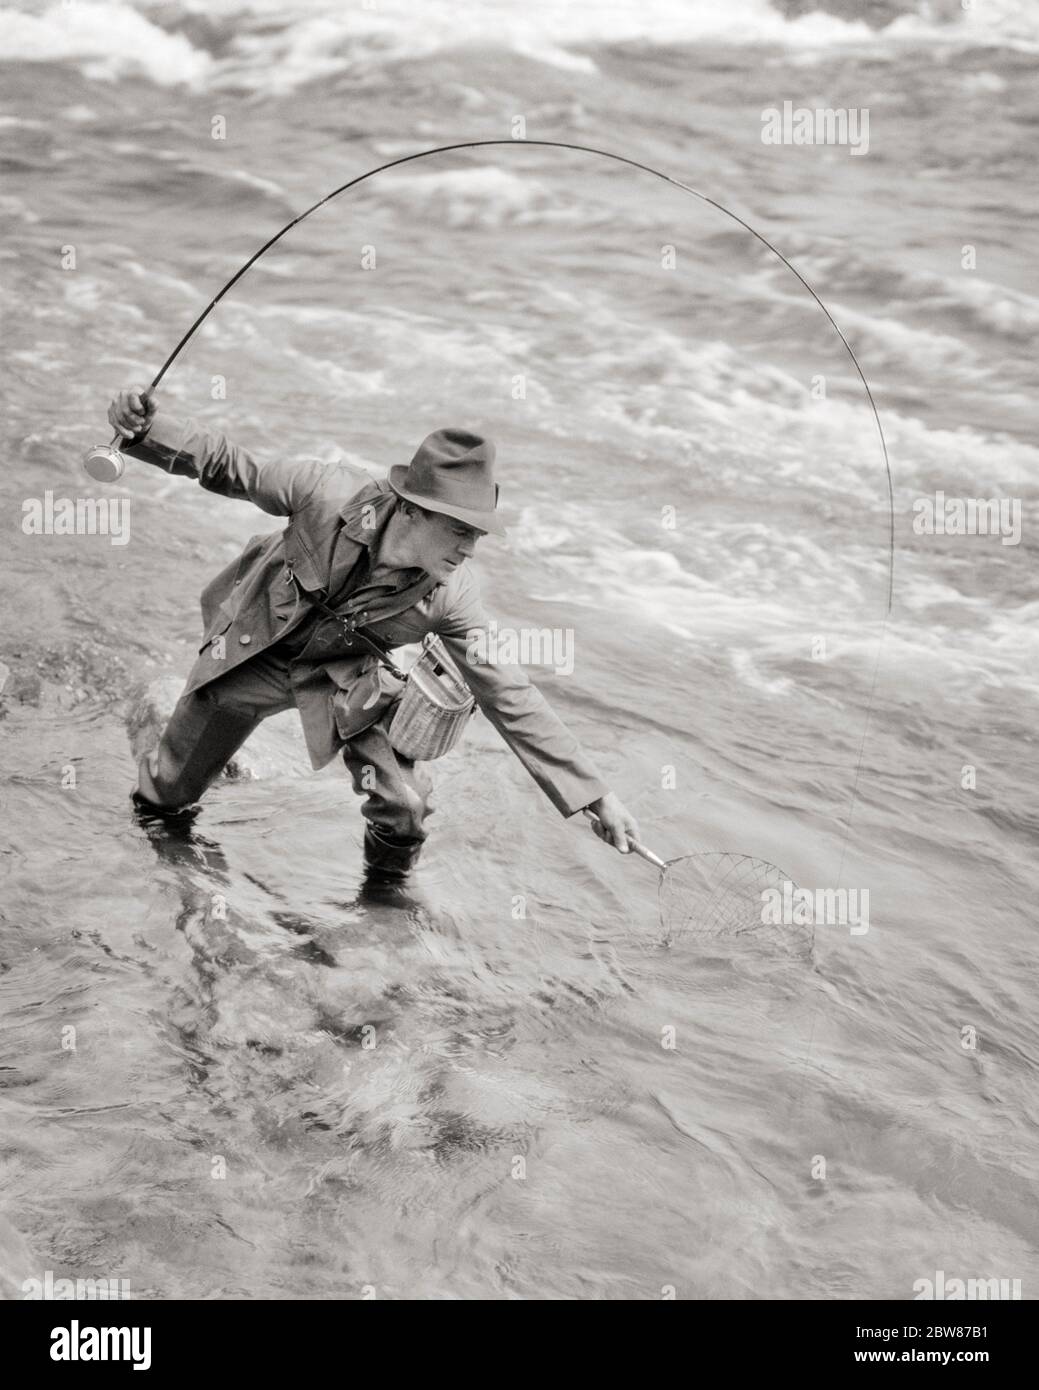 1920s MAN FISHERMAN STANDING IN STREAM BENDING OVER WITH NET TO CATCH FISH  HOOKED ON HIS LINE - a863 HAR001 HARS RURAL HEALTHINESS NATURE COPY SPACE  CATCH FULL-LENGTH PERSONS STREAM MALES ATHLETIC